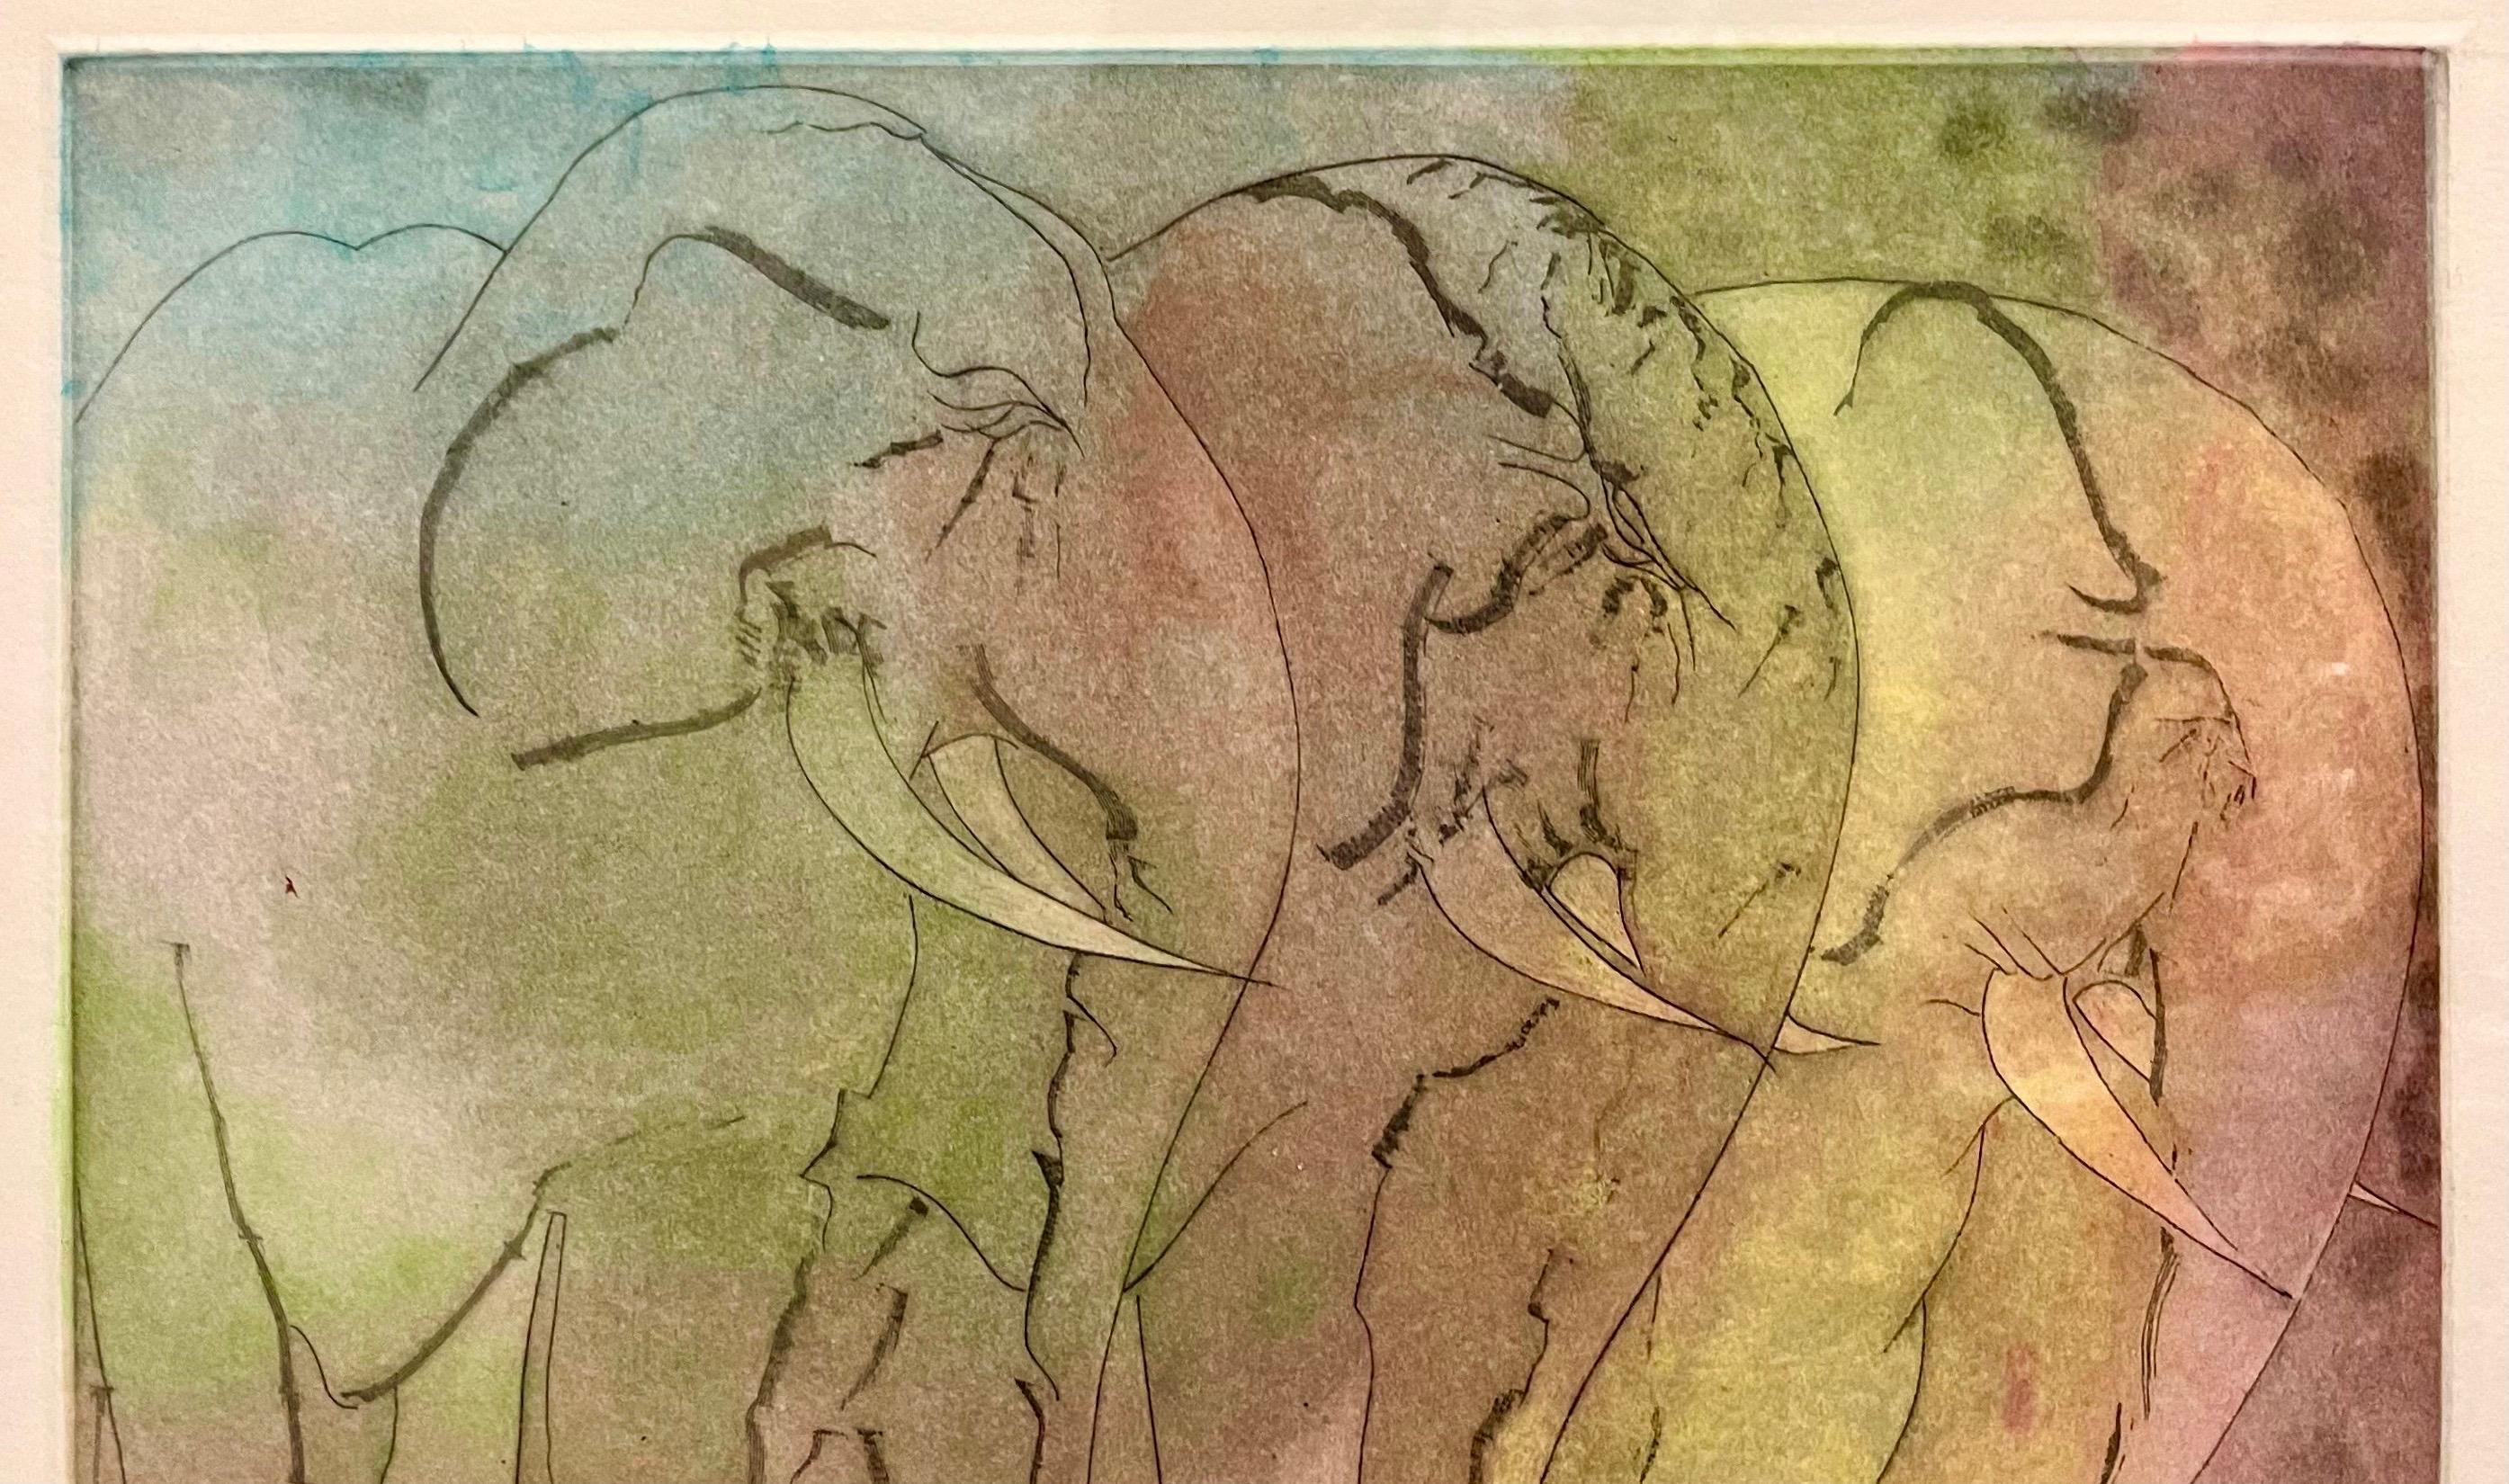 Stanley Boxer Aquatint Intaglio Etching Elephant Herd Abstract Expressionist  For Sale 8